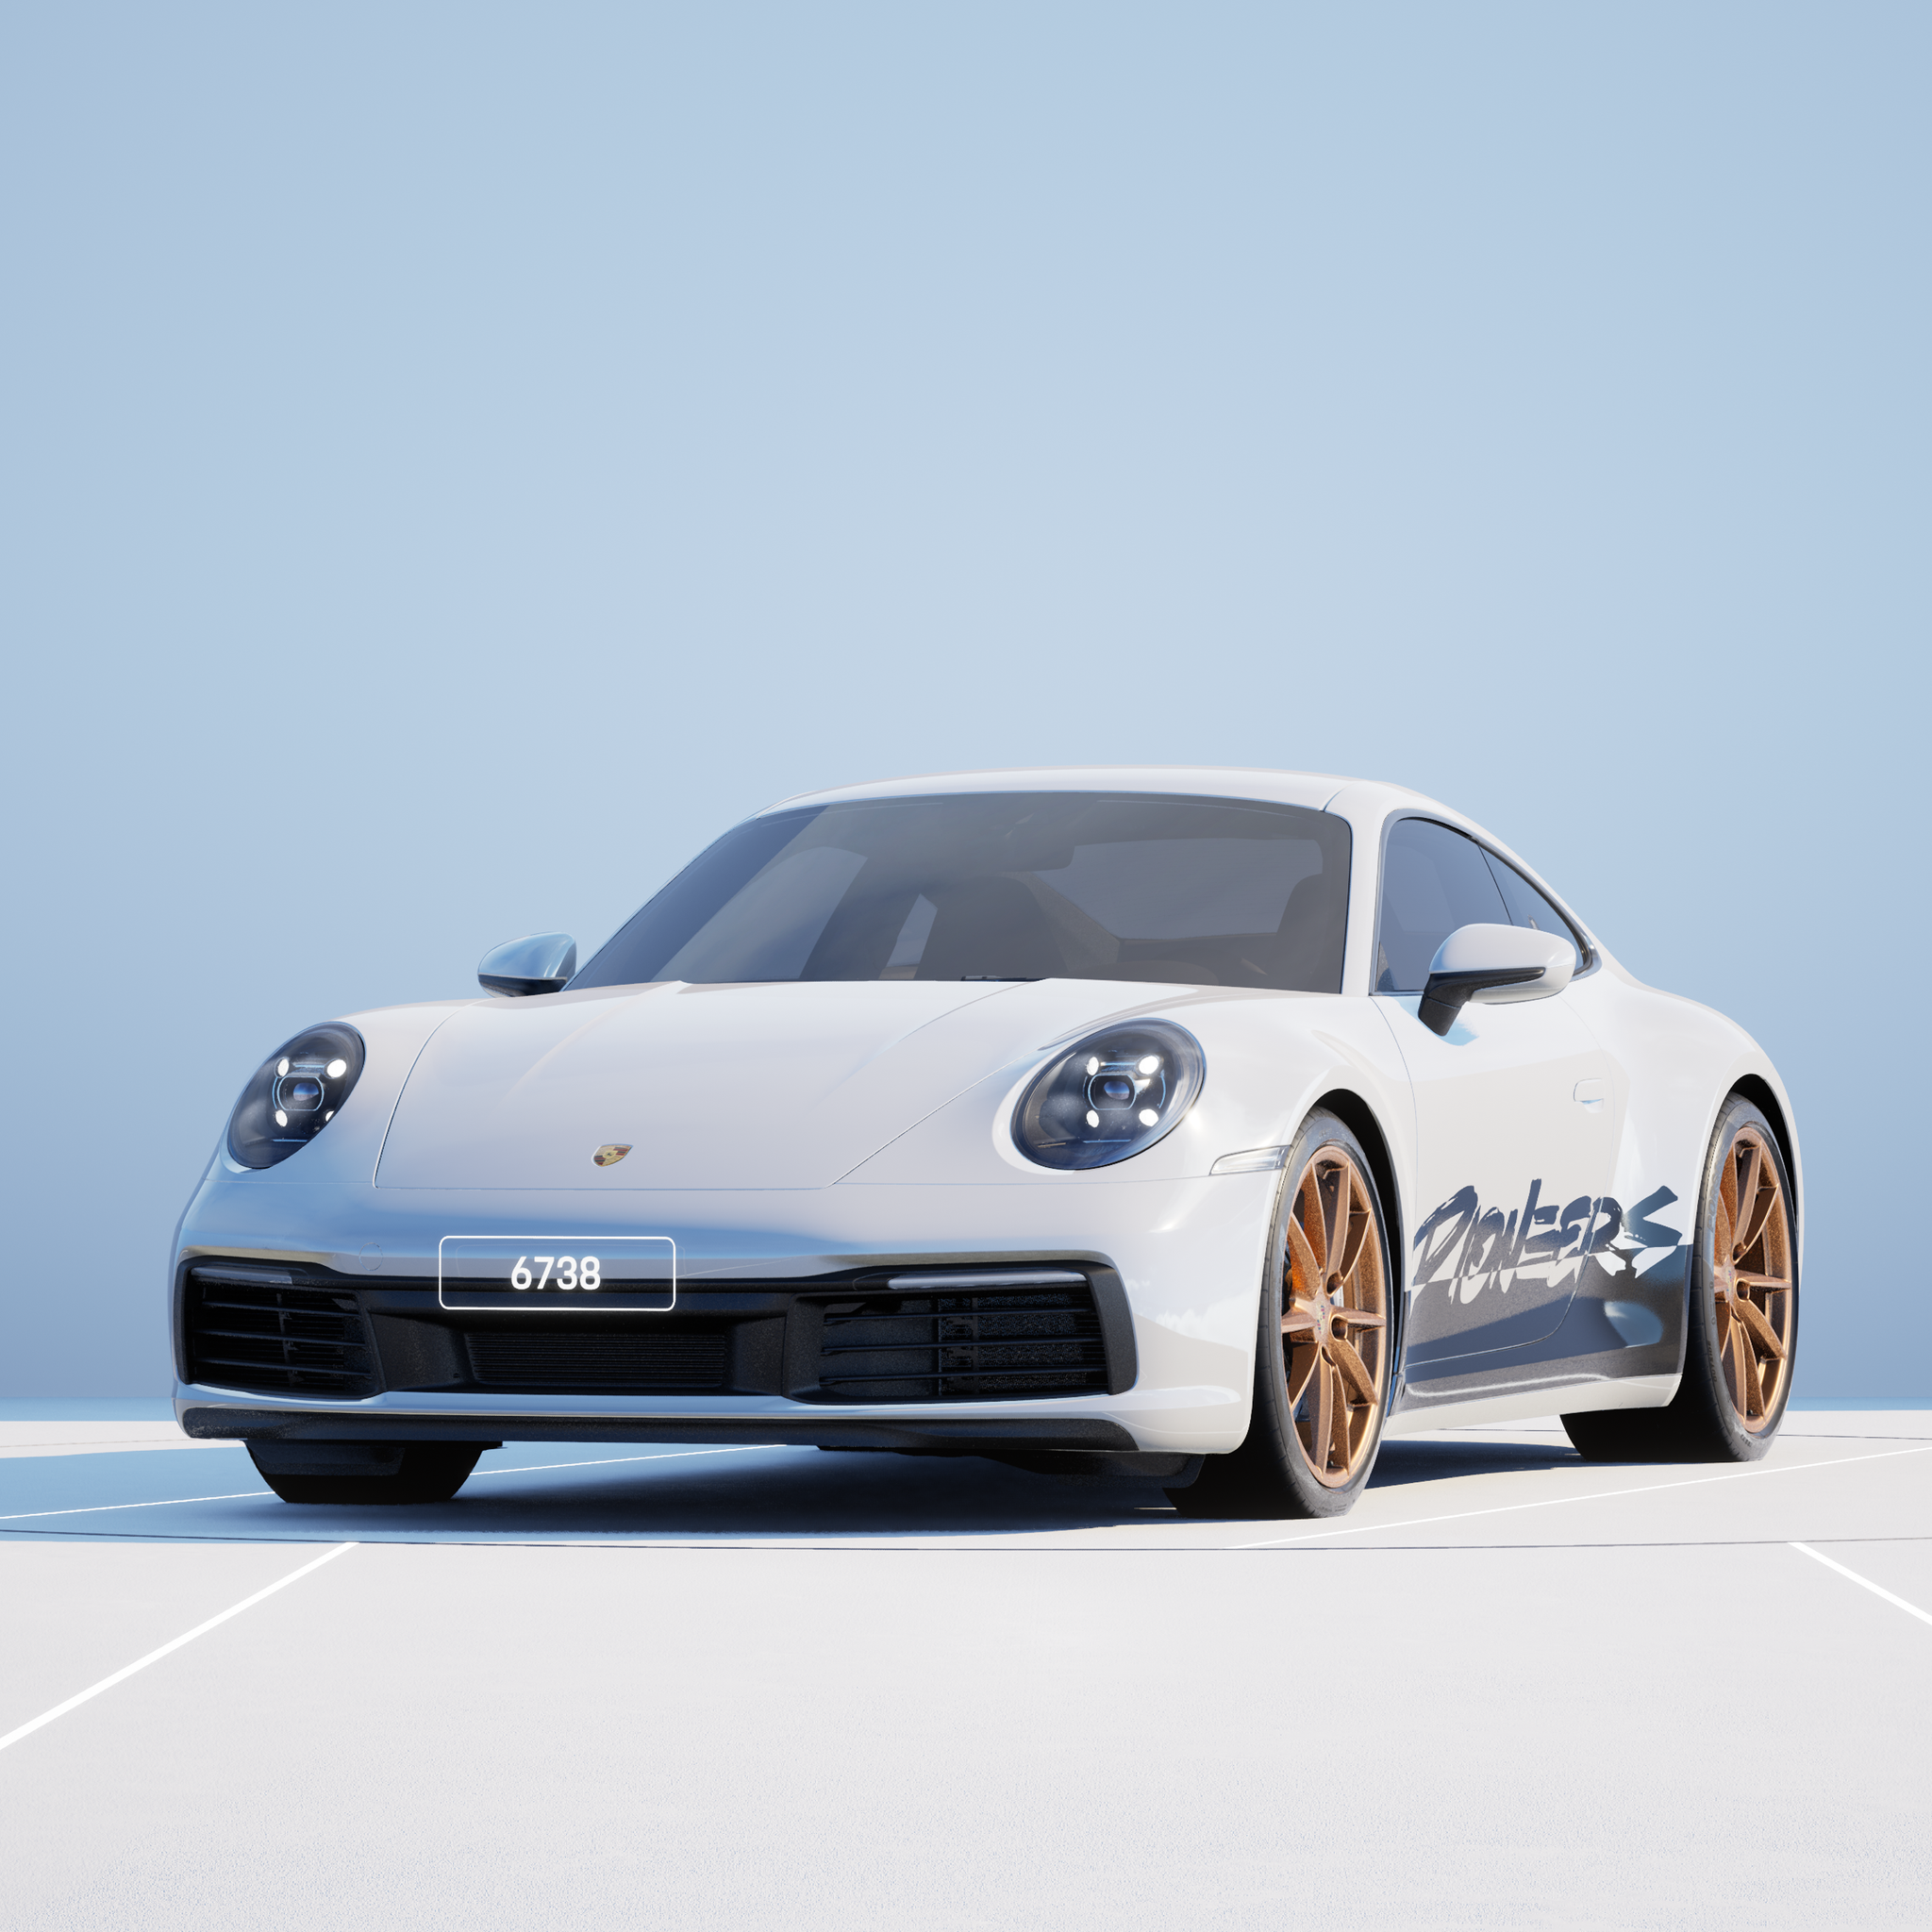 The PORSCHΞ 911 6738 image in phase